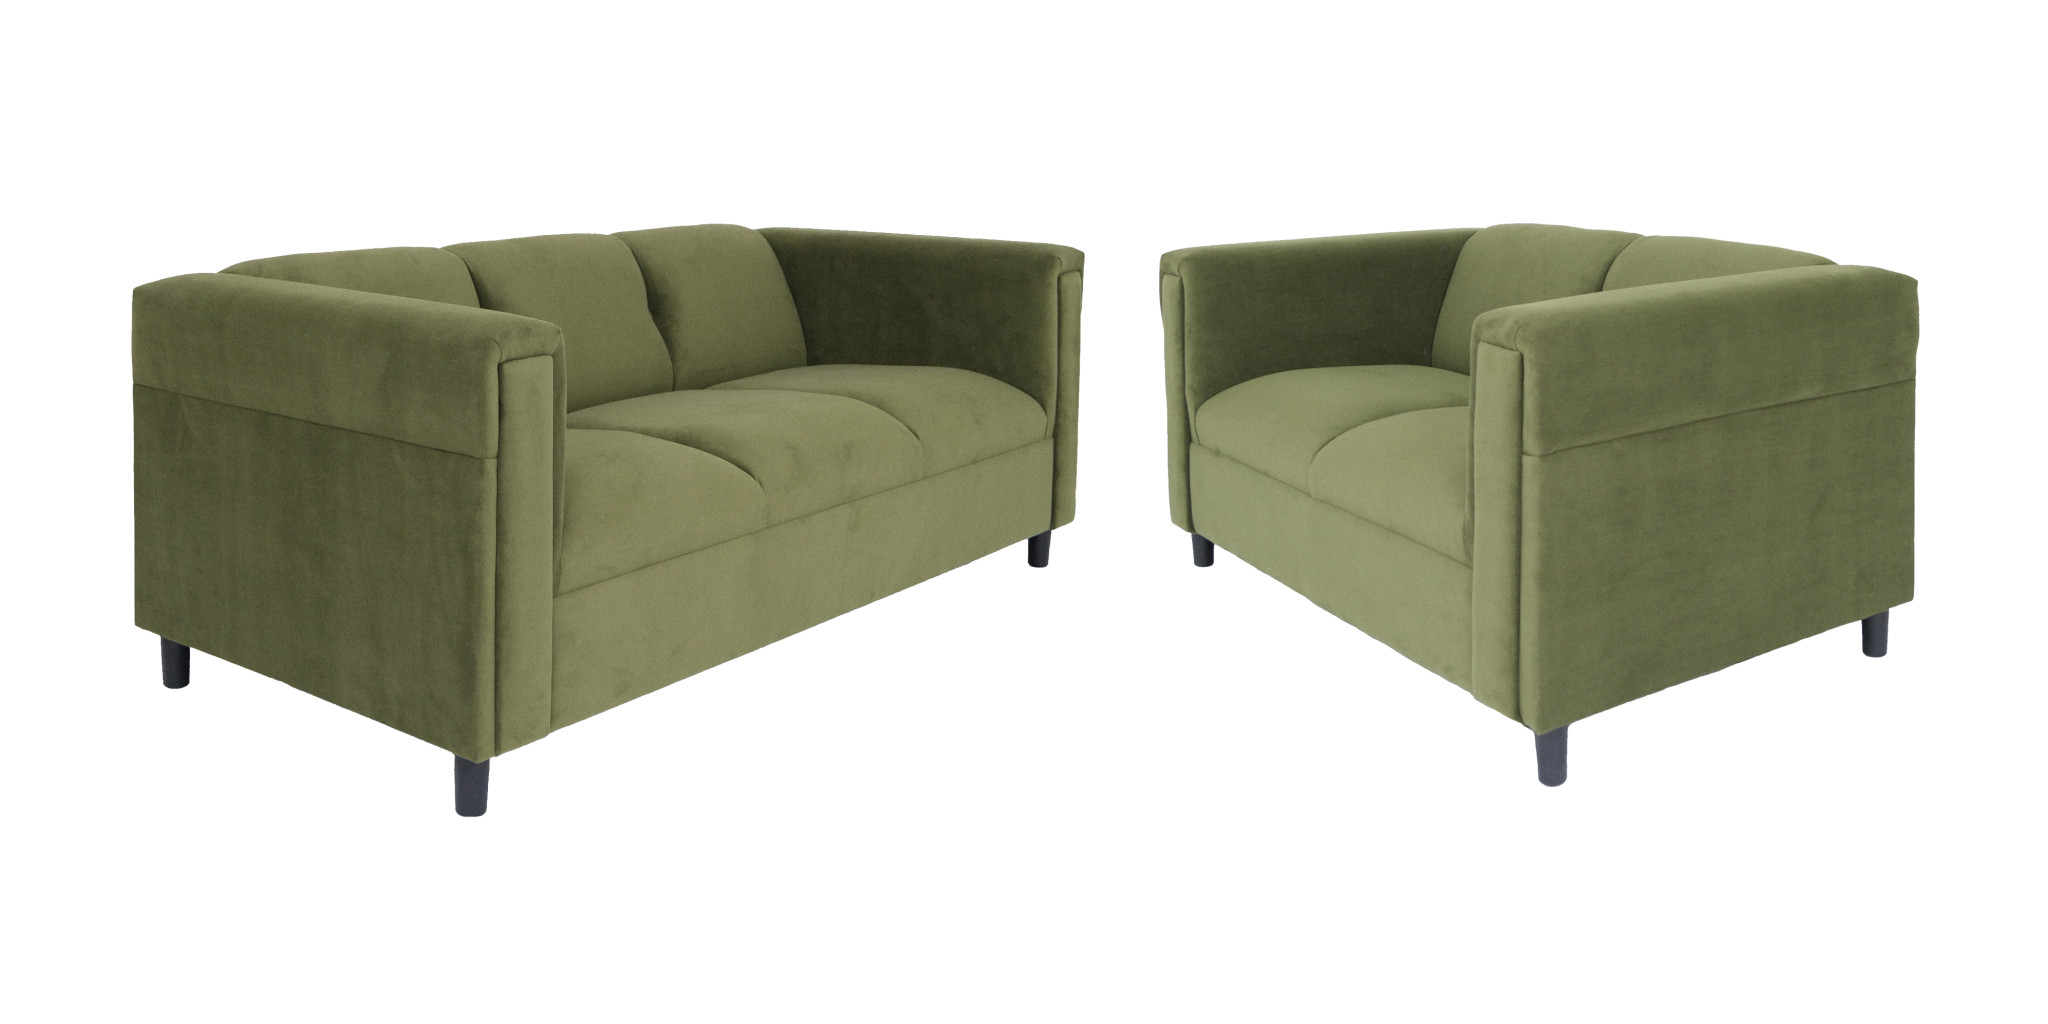 Two Piece Green Five Person Seating Set-530495-1